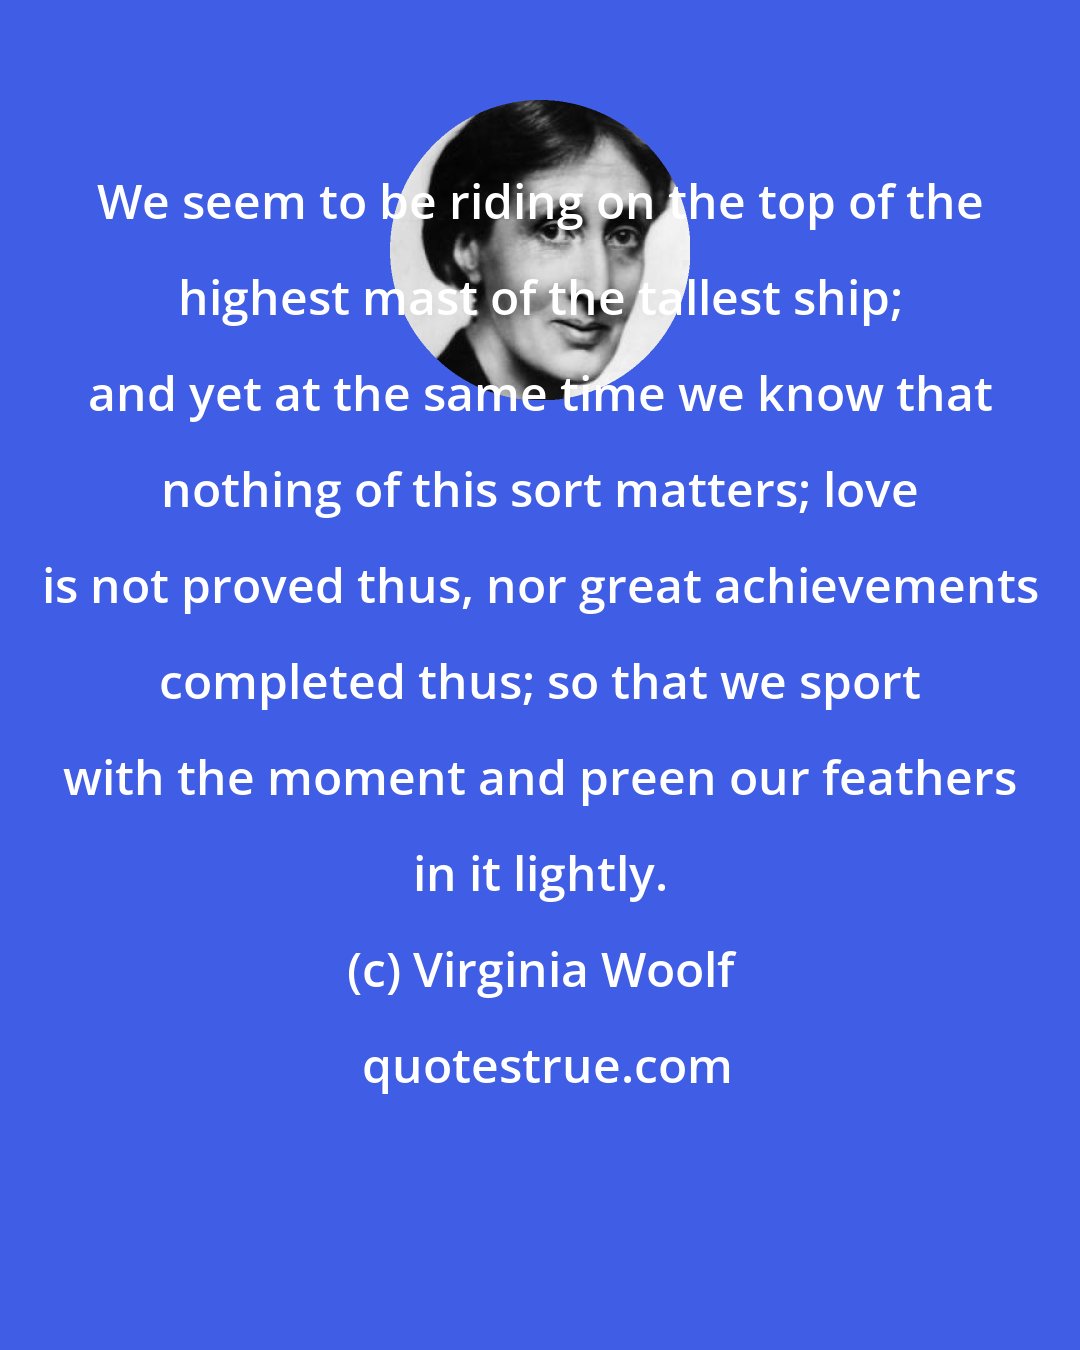 Virginia Woolf: We seem to be riding on the top of the highest mast of the tallest ship; and yet at the same time we know that nothing of this sort matters; love is not proved thus, nor great achievements completed thus; so that we sport with the moment and preen our feathers in it lightly.